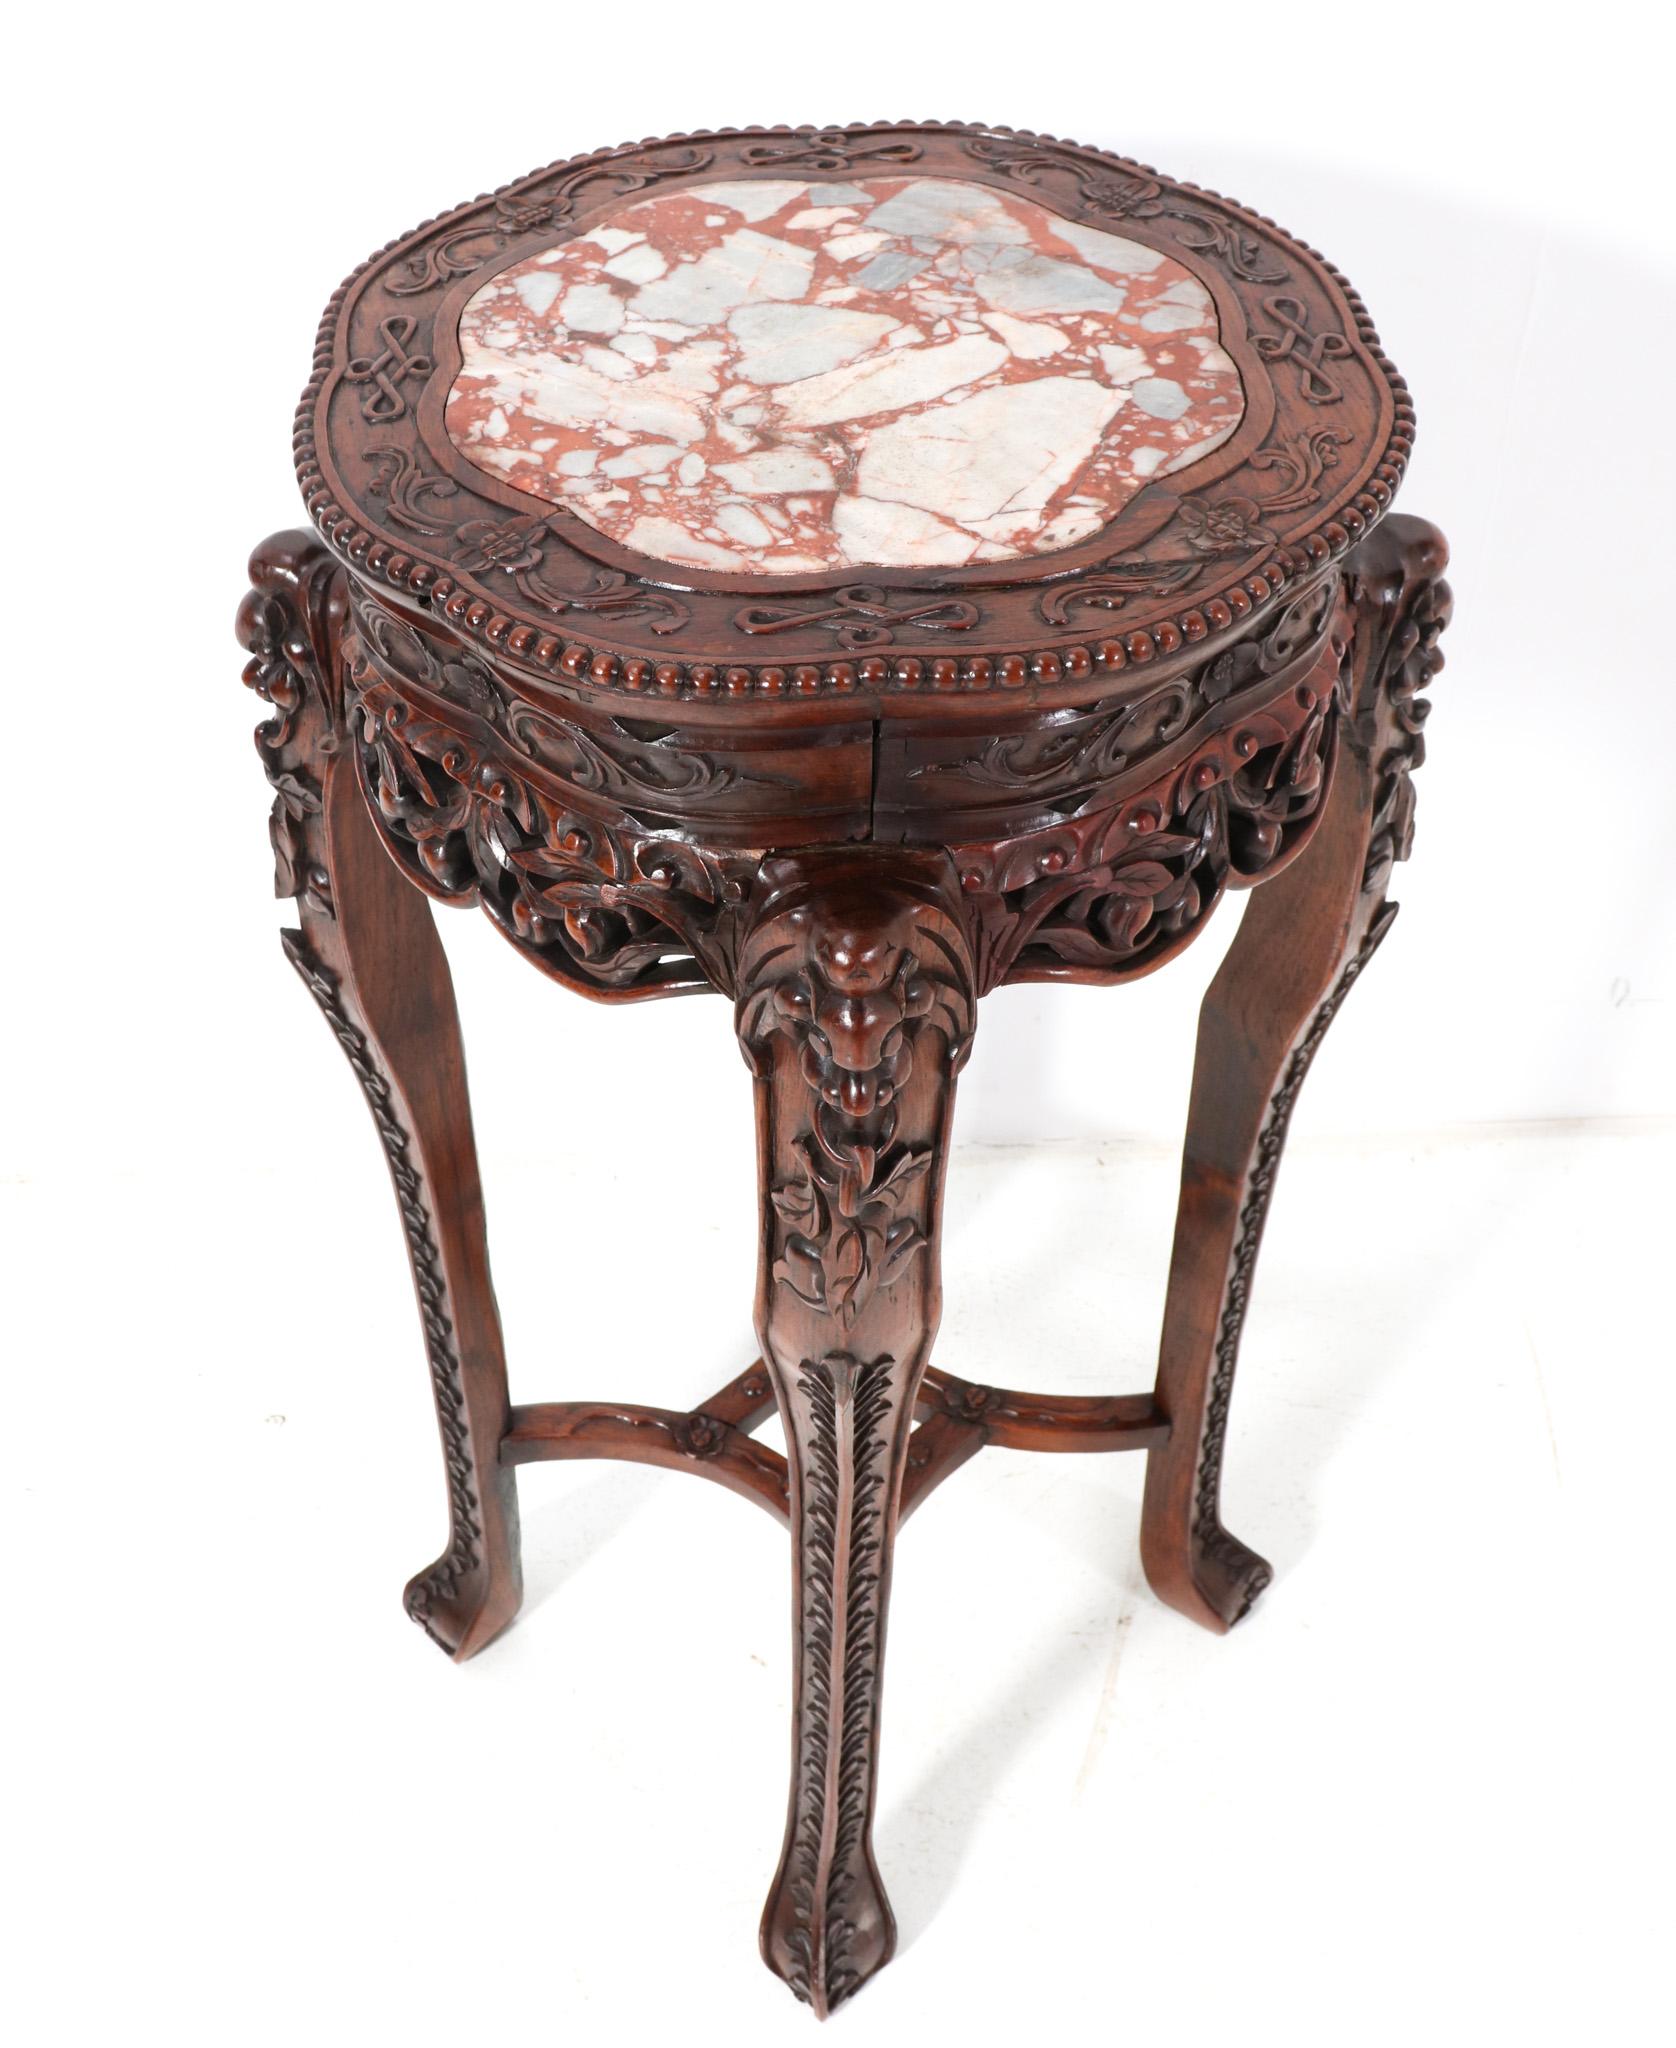 Stunning and rare Chinese pedestal table.
Striking Chinese design from the 1920s.
hand carved 